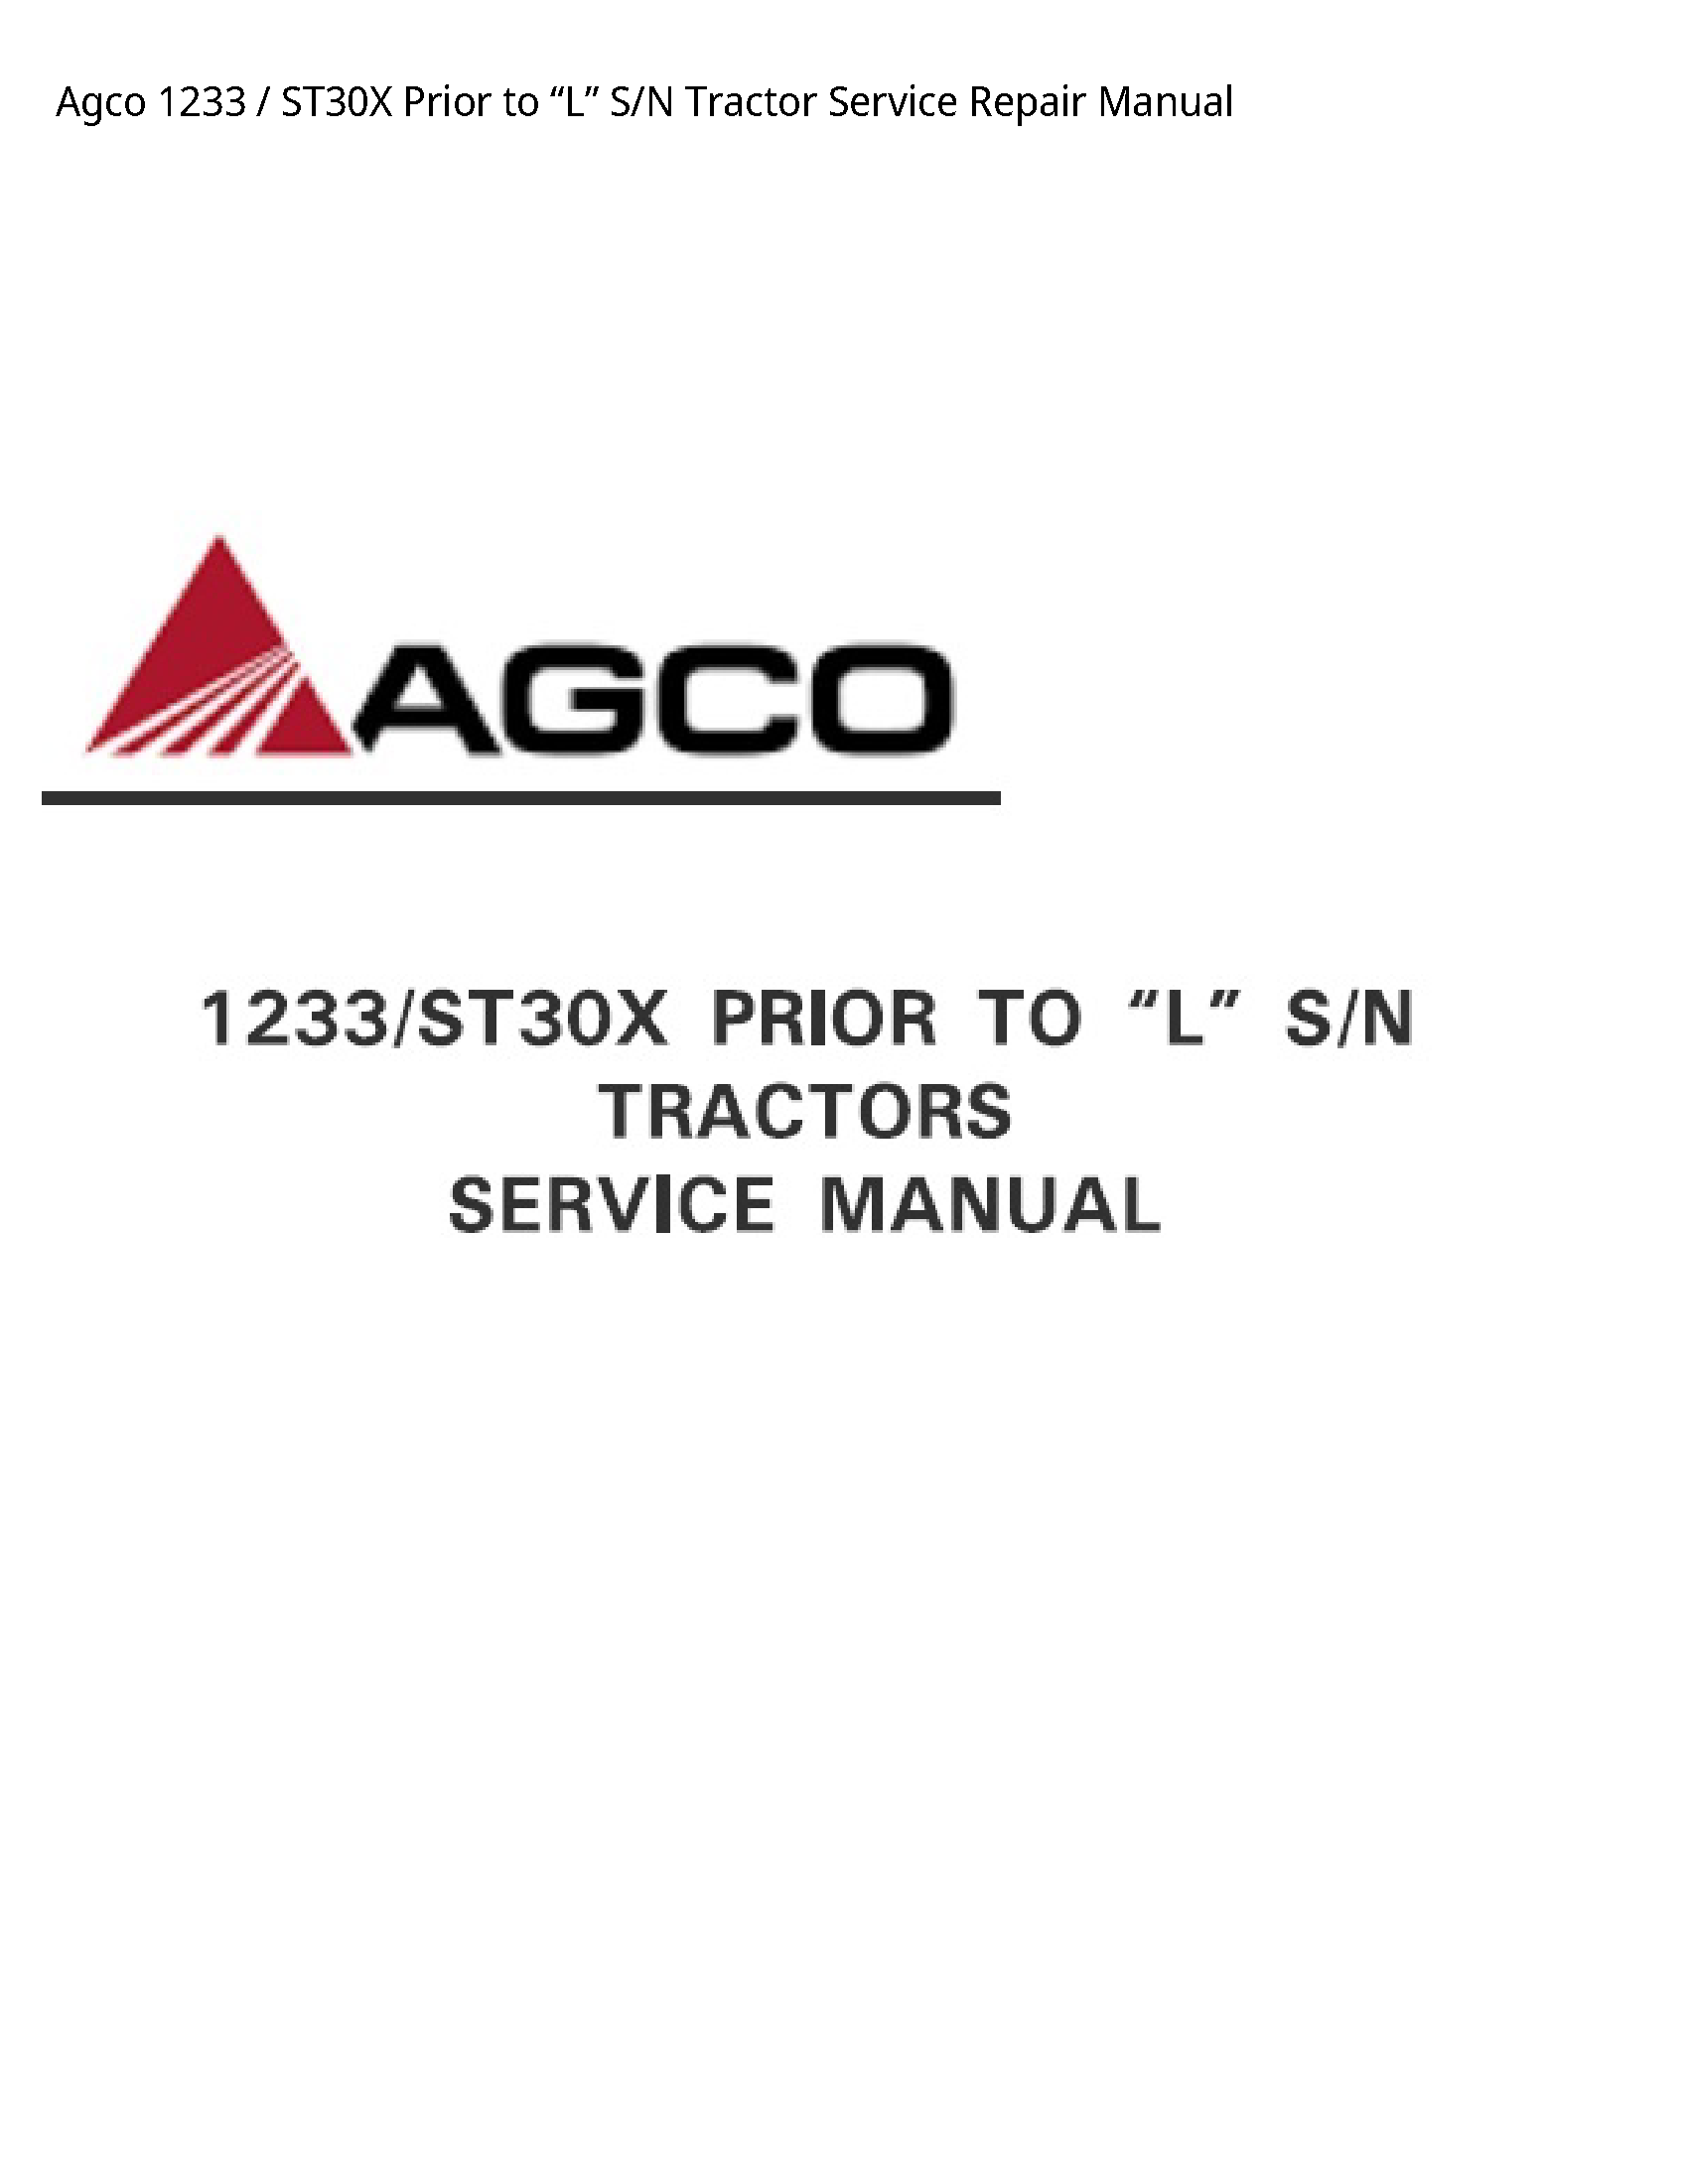 AGCO 1233 Prior to “L” S/N Tractor manual